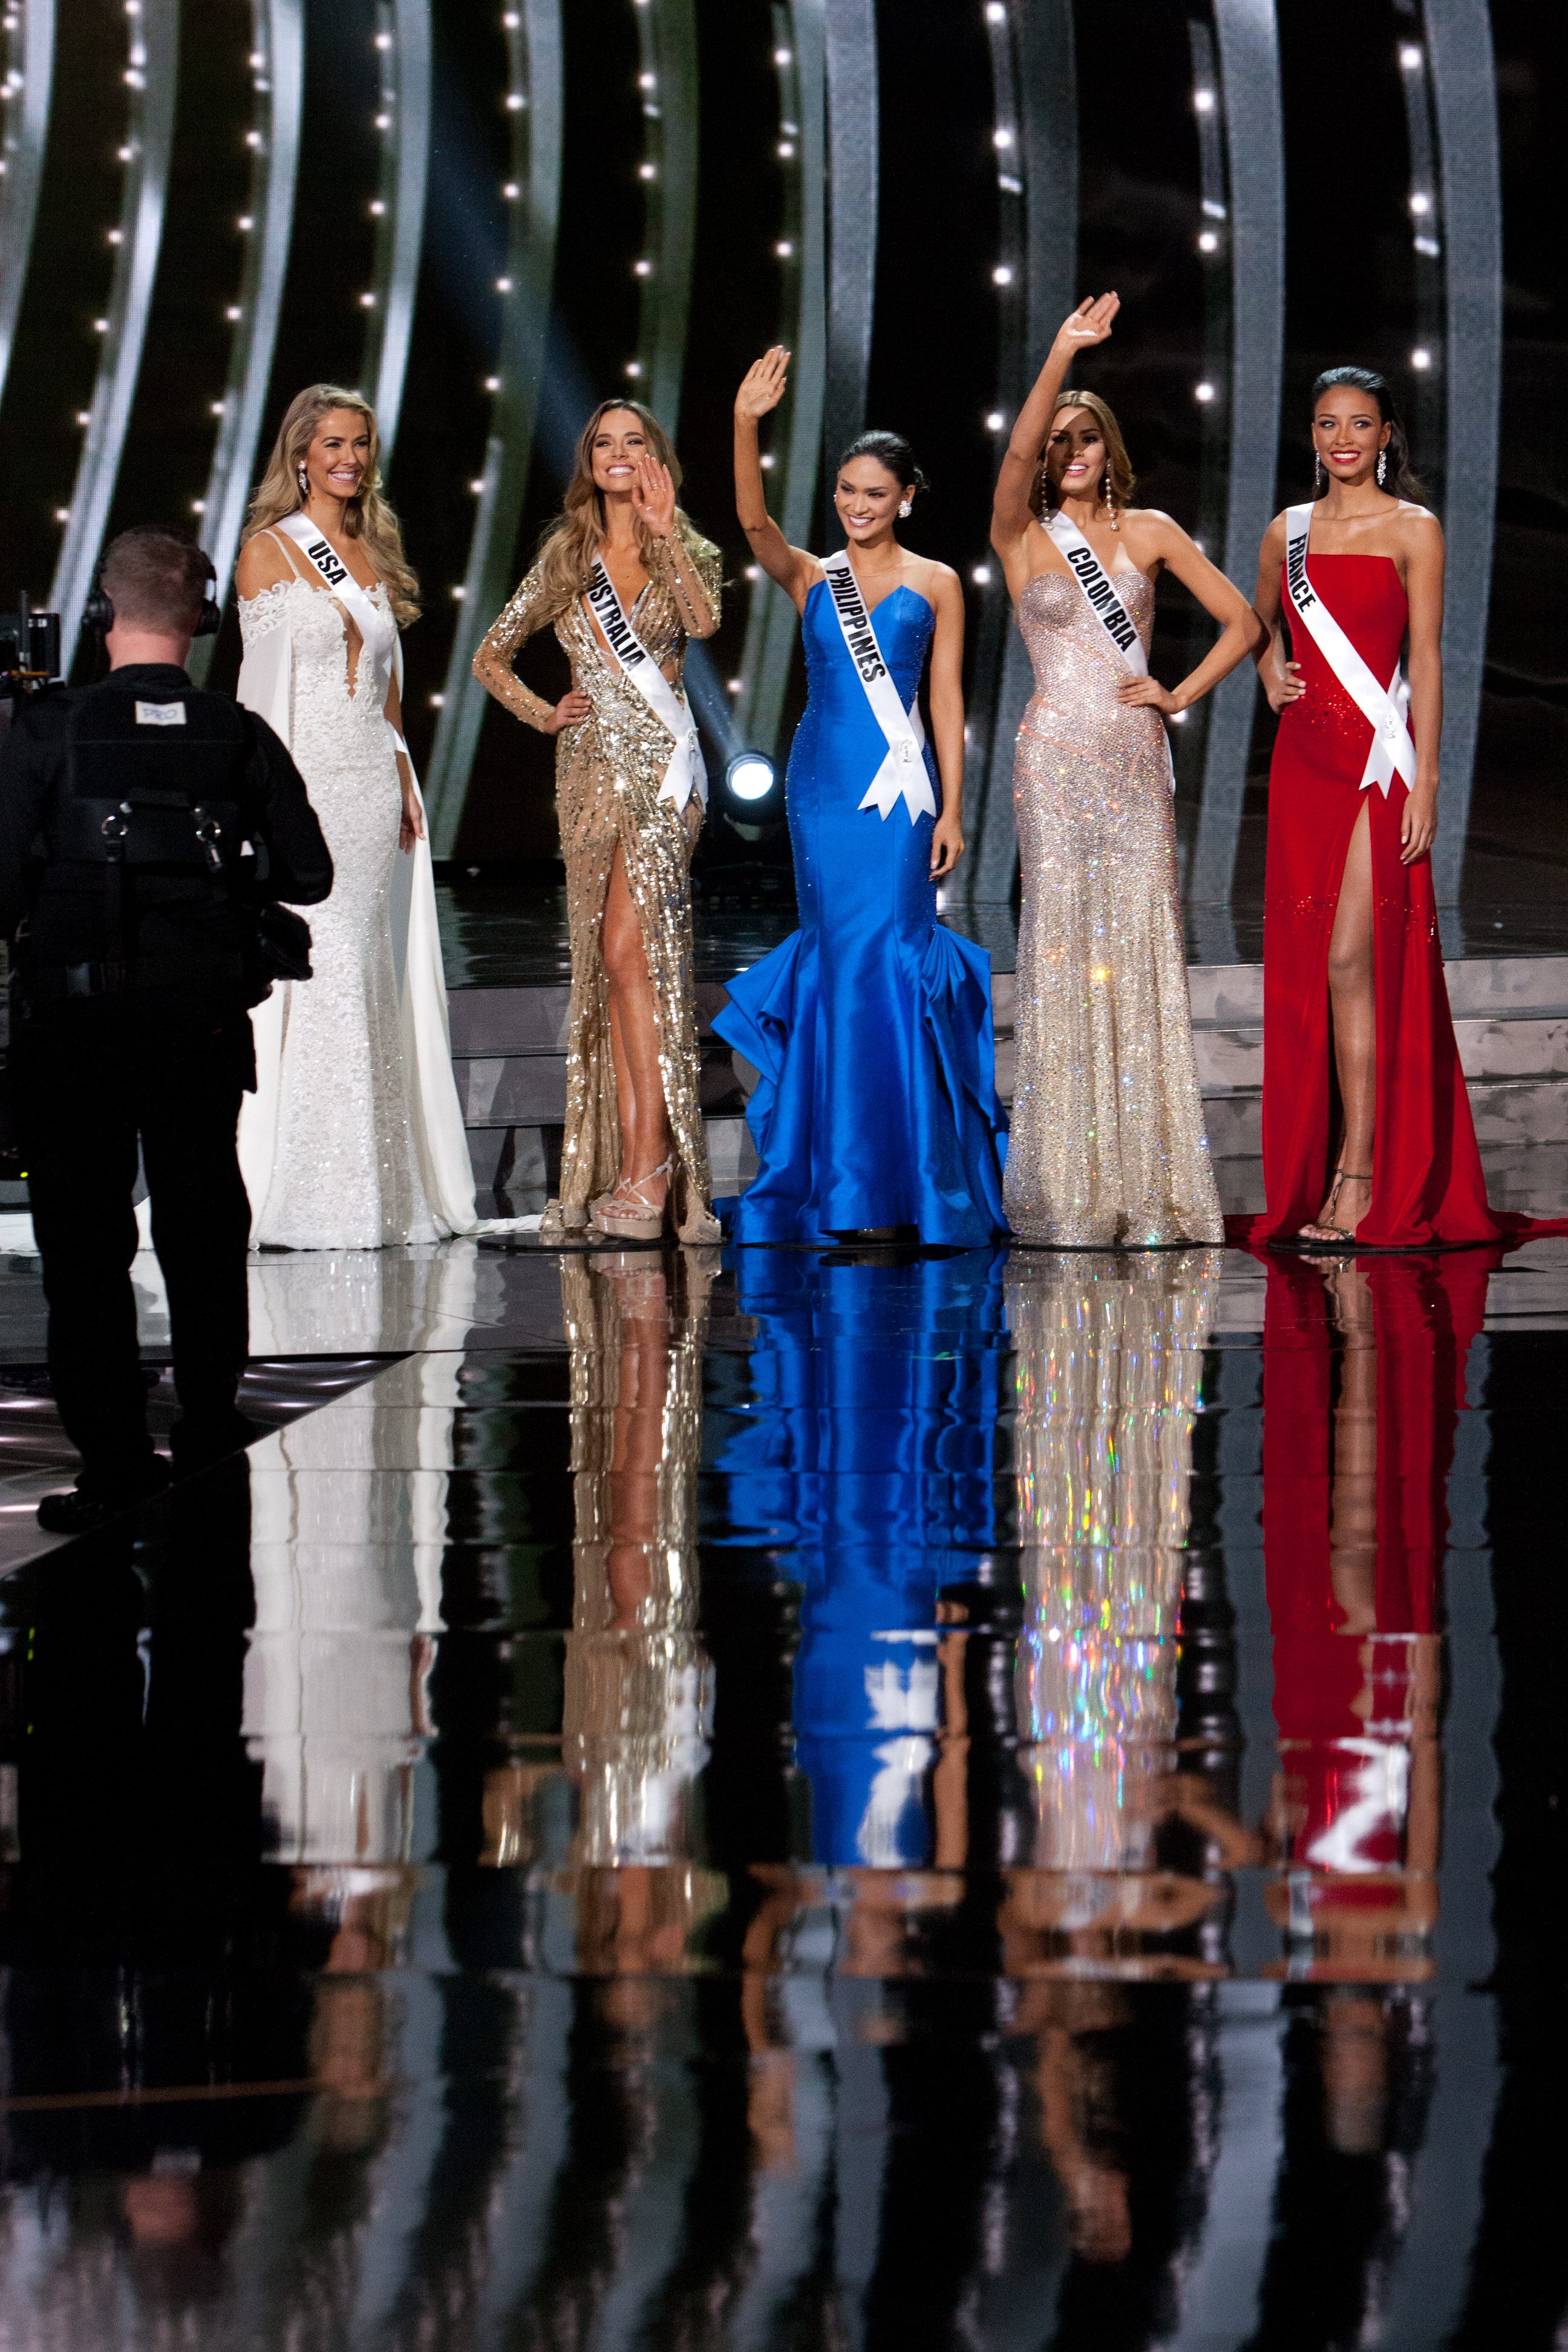 Olivia Jordan, Miss USA 2015; Monika Radulovic, Miss Australia 2015; Pia Alonzo Wurtzbach, Miss Philippines 2015; Ariadna Gutierrez, Miss Colombia 2015; and Flora Coquerel, Miss France 2015; prepare to answer their Top 5 Final Question on stage with Host, Steve Harvey during The 2015 MISS UNIVERSE® Telecast airing live from Planet Hollywood Resort & Casino on FOX Sunday, December 20. The 2015 Miss Universe contestants have spent the past three weeks in Las Vegas touring, filming, rehearsing, and preparing to compete for the DIC Crown. HO/The Miss Universe Organization 